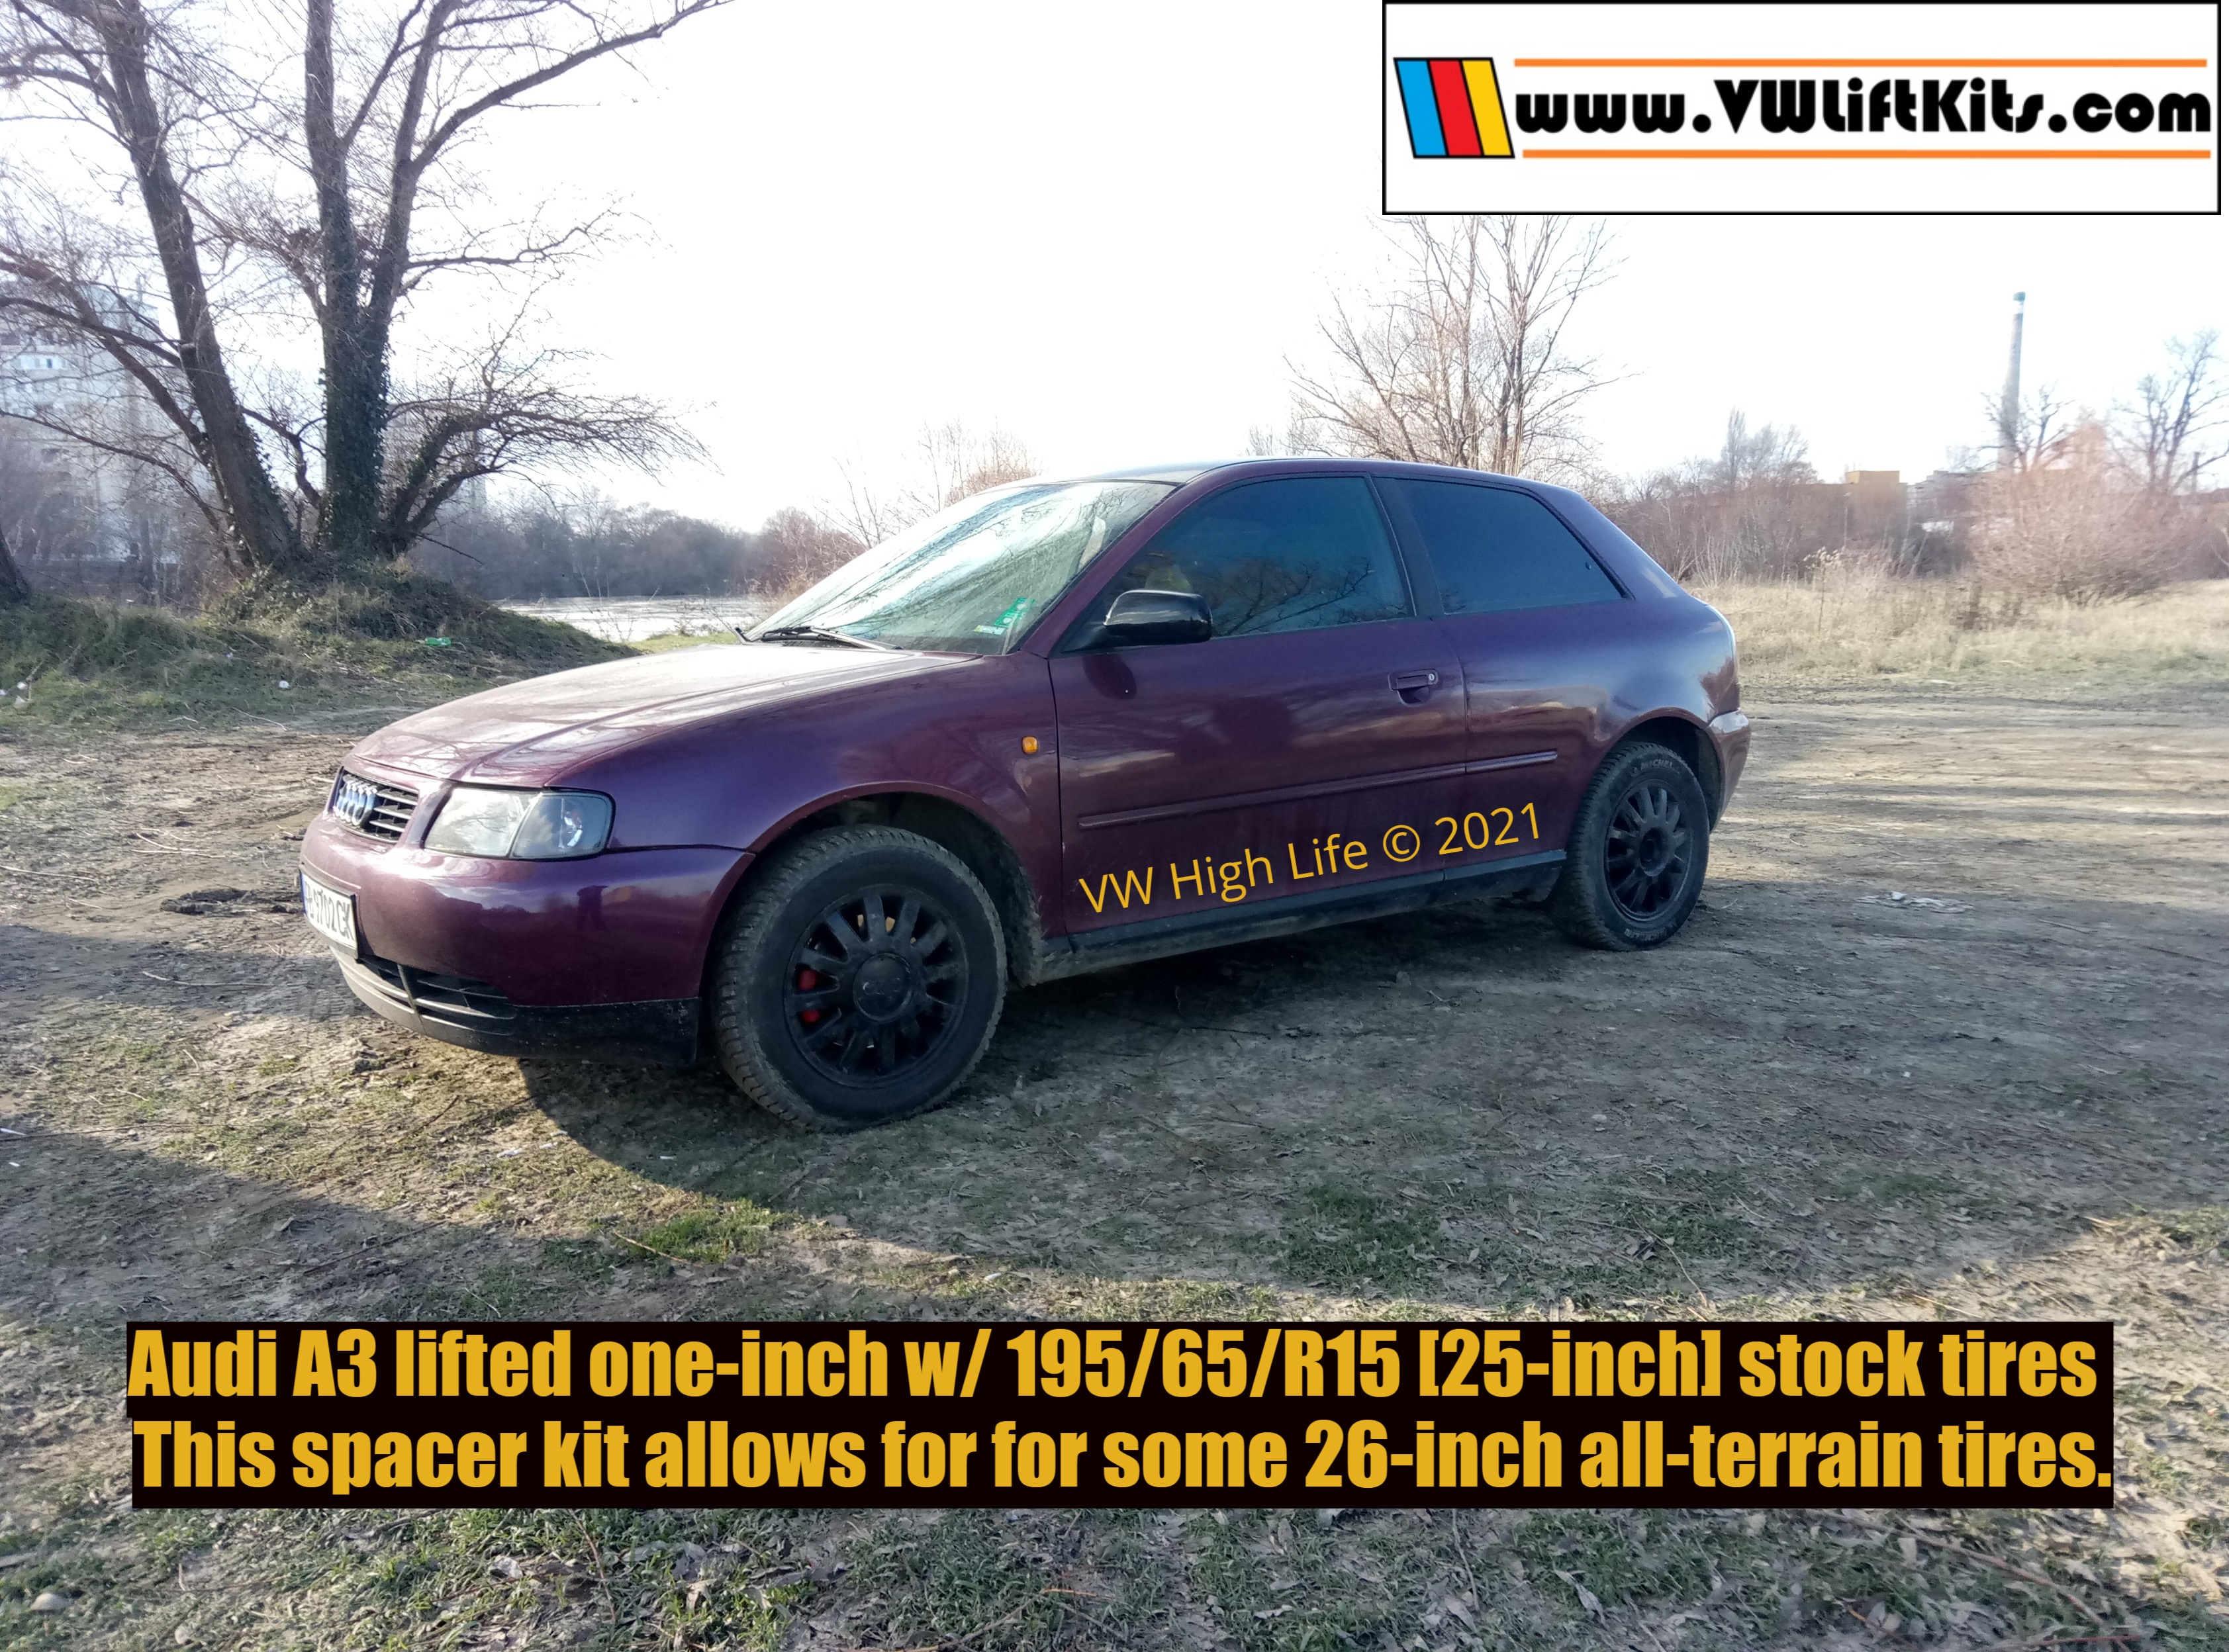 Kiril of Nessebar Bulgaria lifted his 1998 Audi A3 with a one-inch spacer kit and plans to mount 26-inch all-terrain tires.